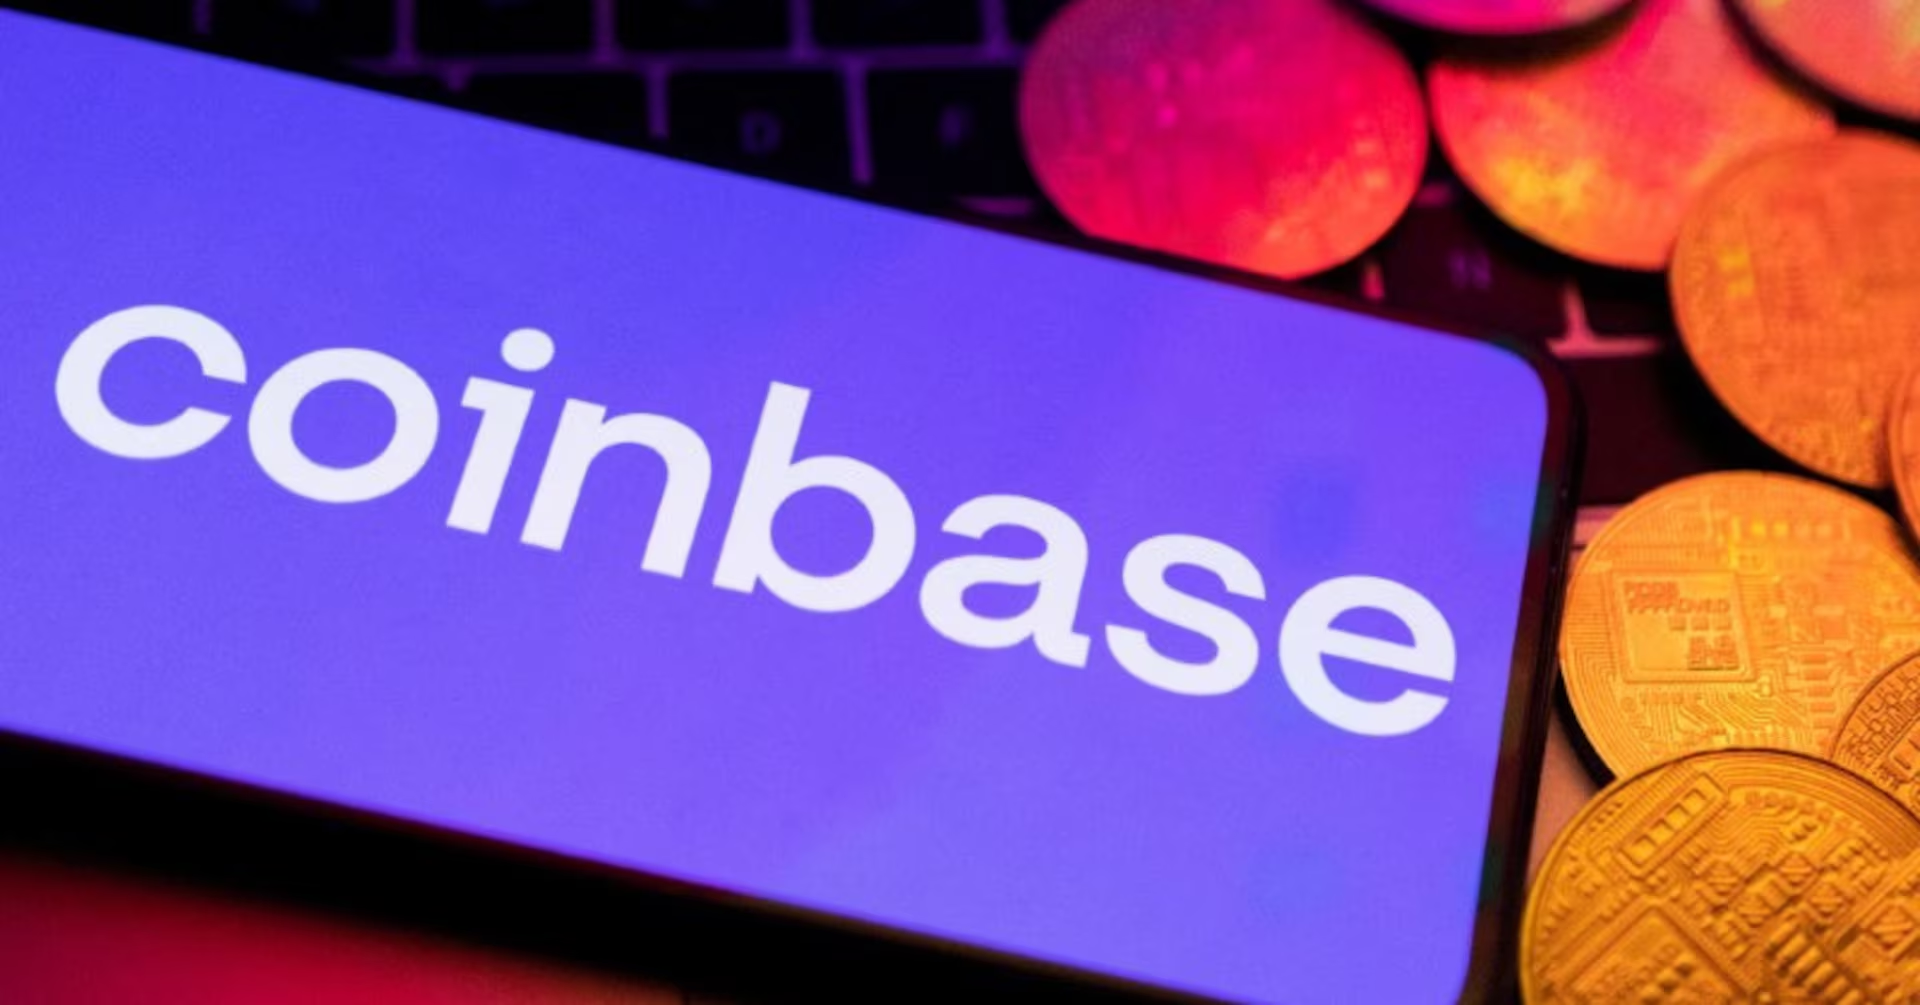 Coinbase to Target $600 Billion in Australia’s Pension Sector